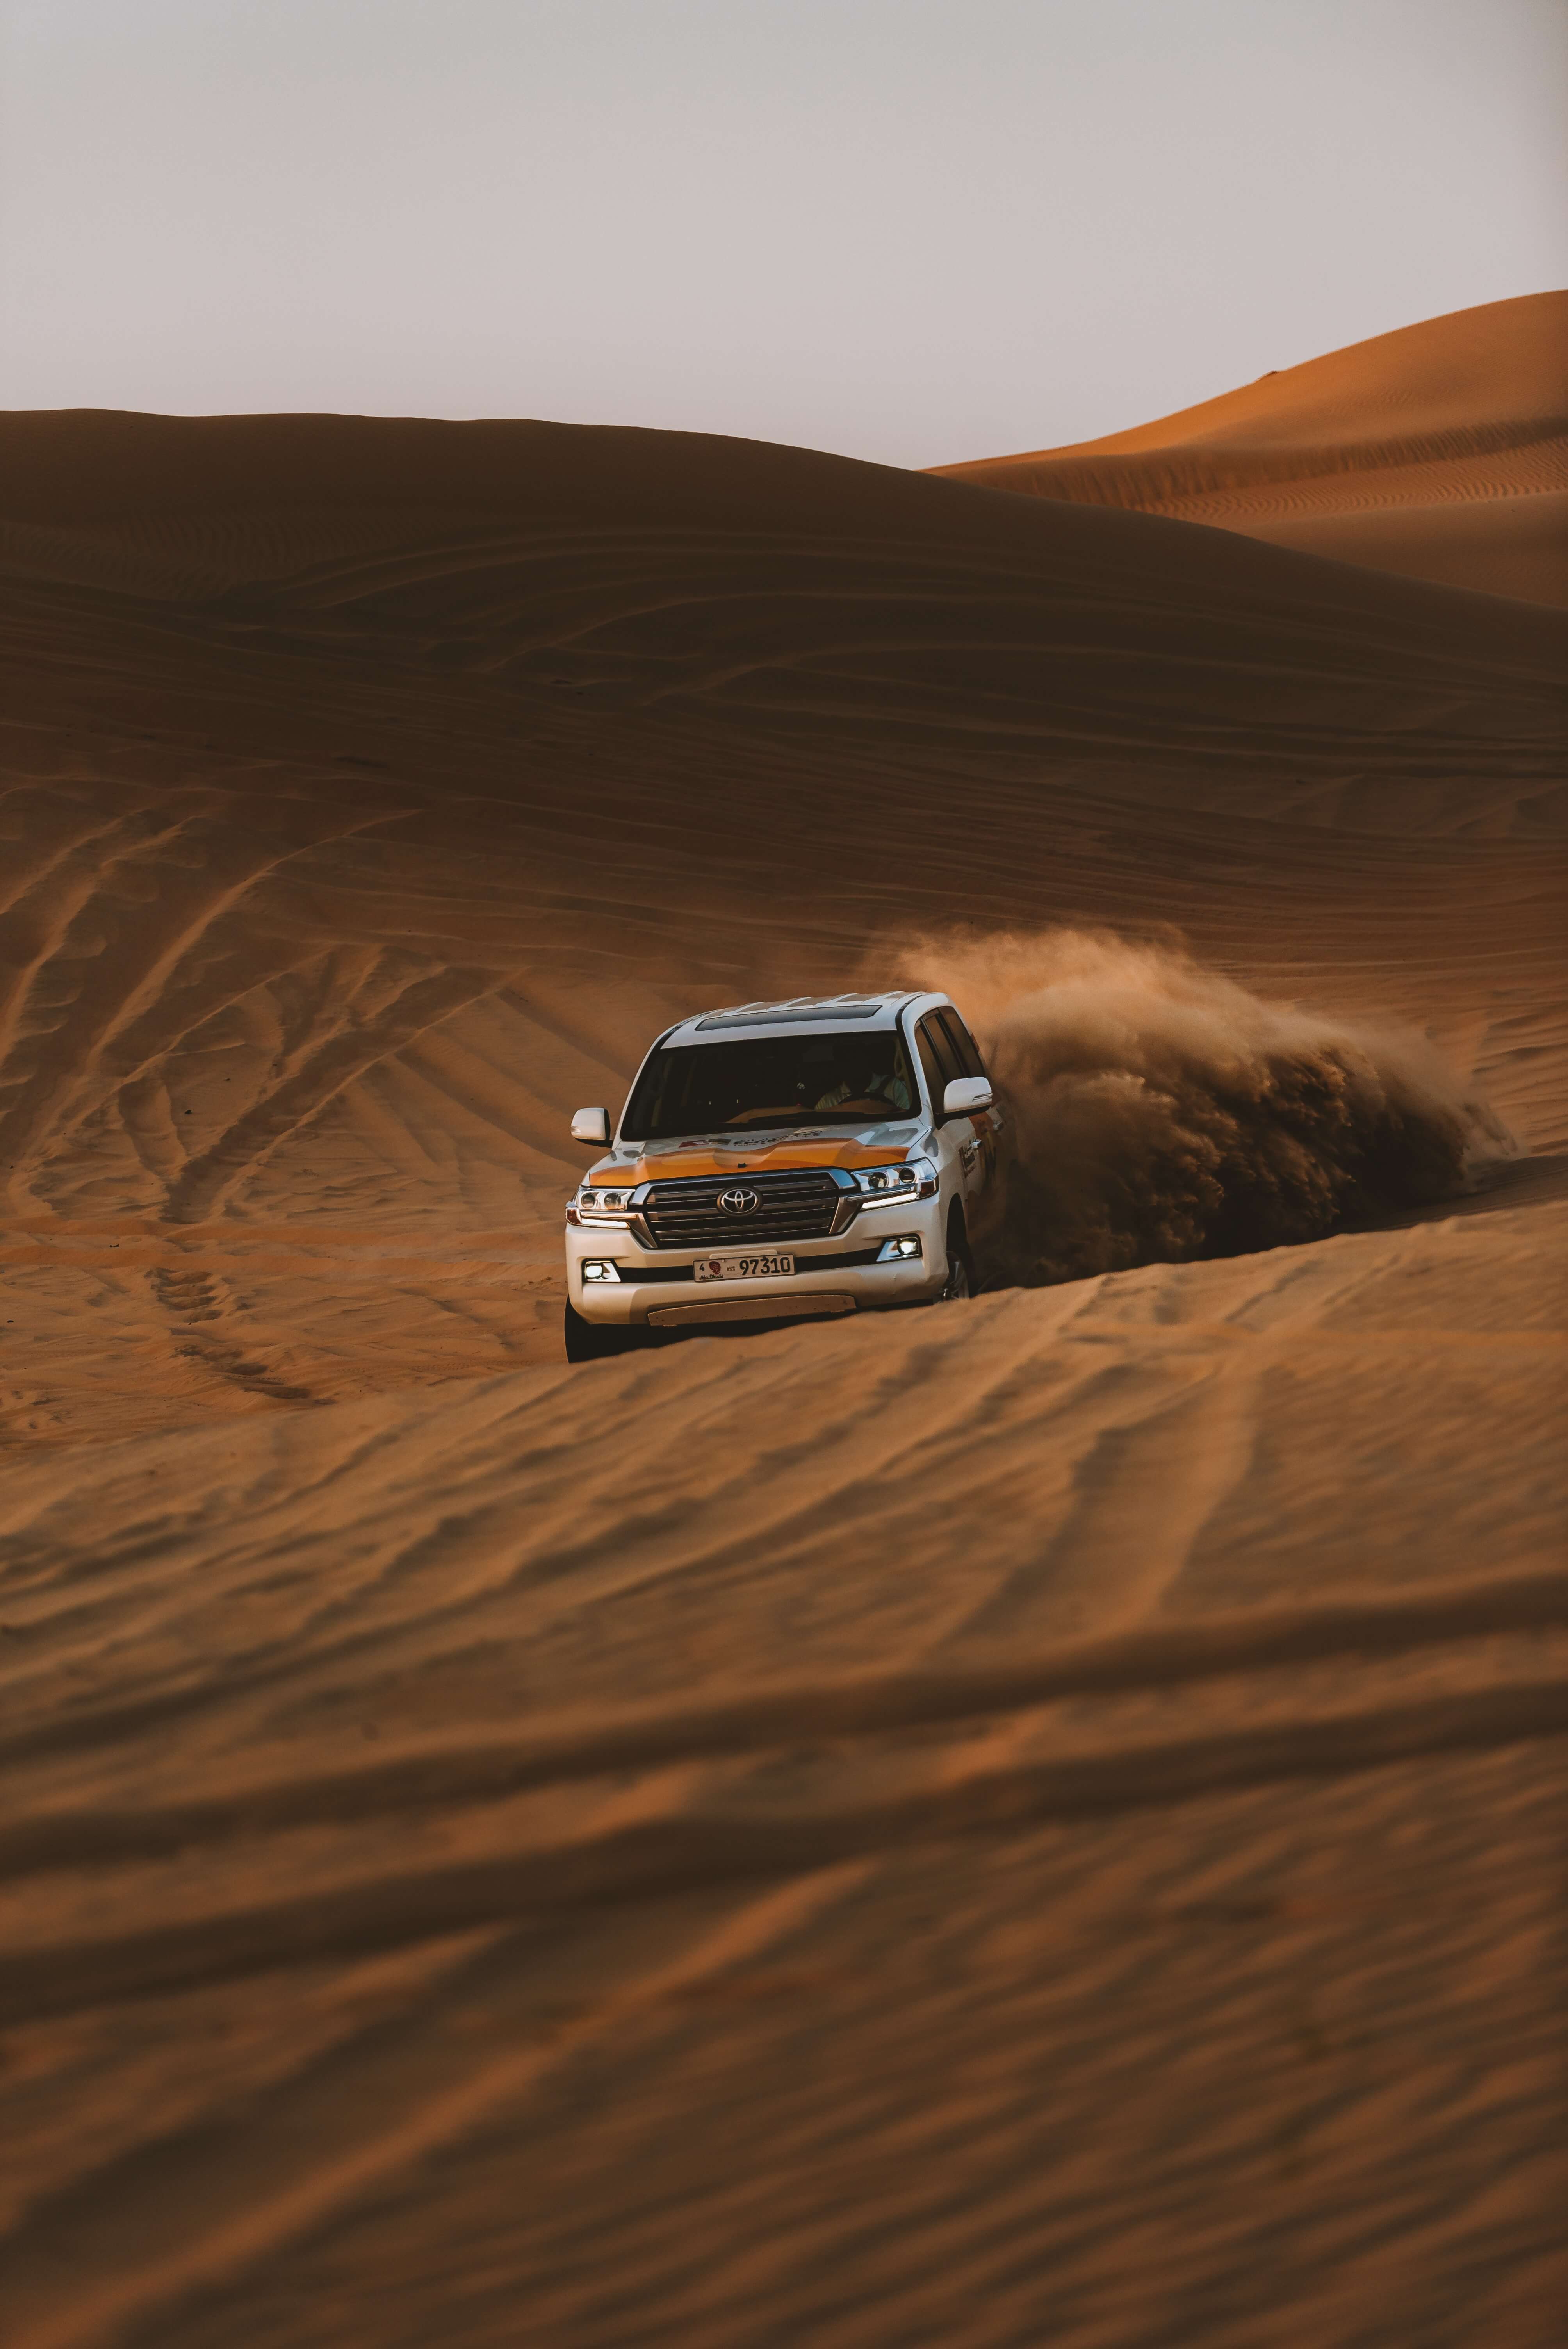 The Thrilling Dune Bashing Experience